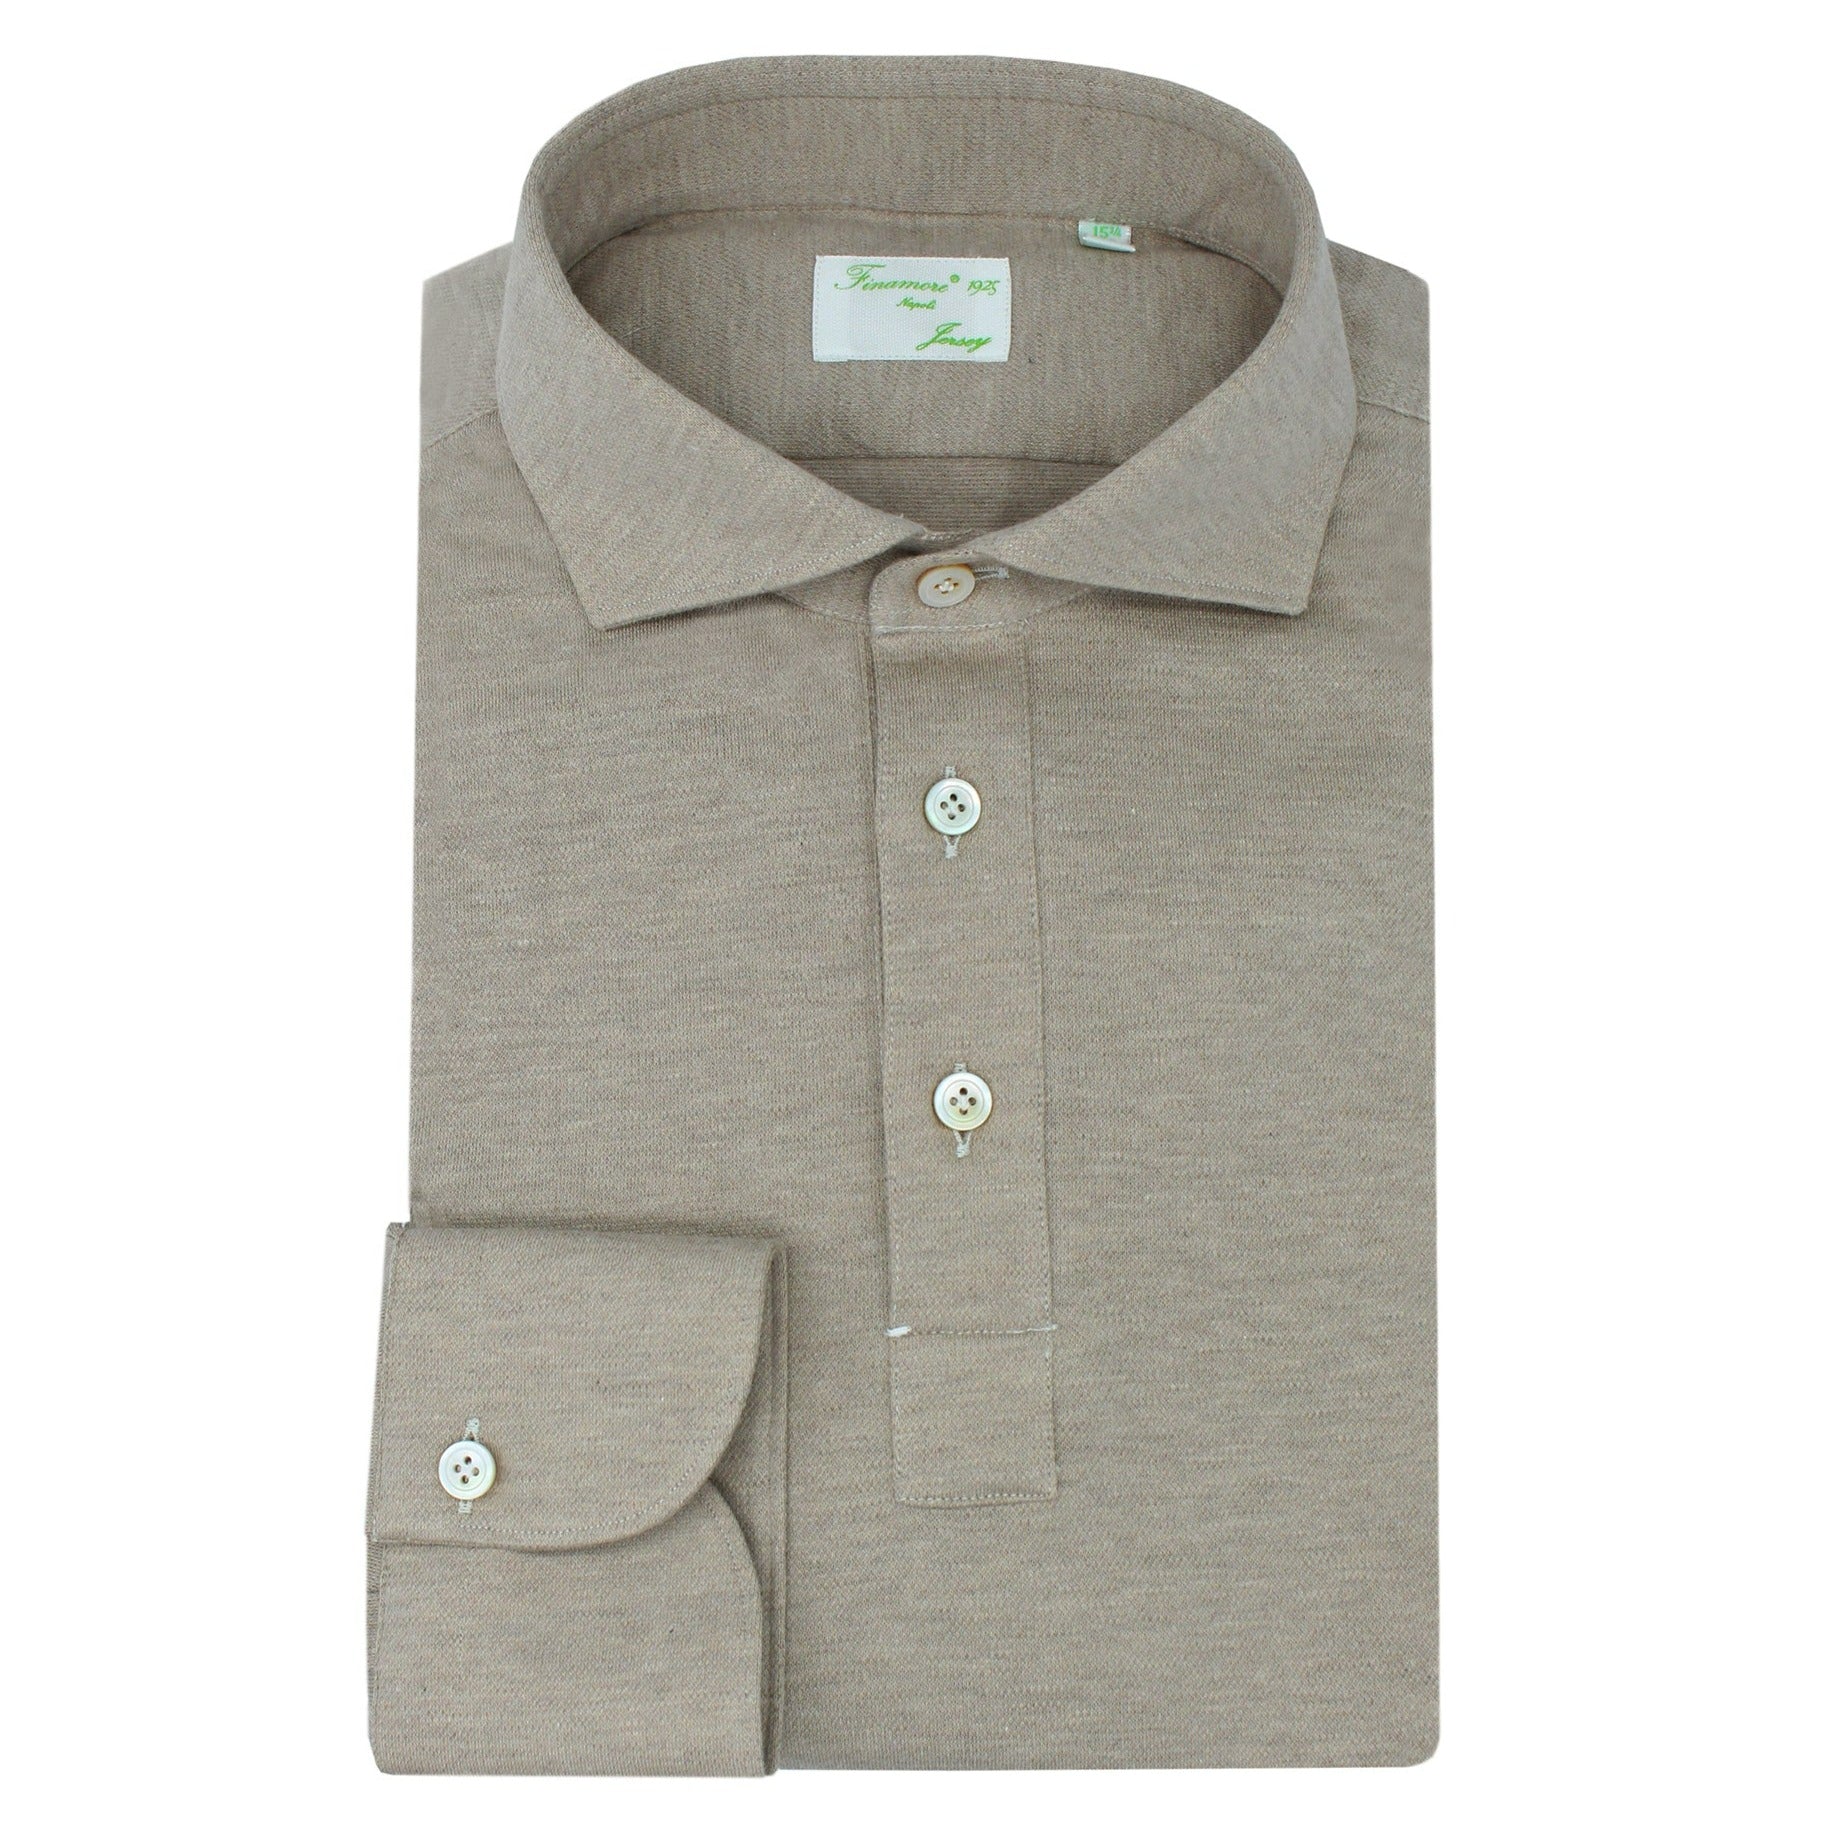 Orlando cotton and cashmere polo shirt slim fit light brown